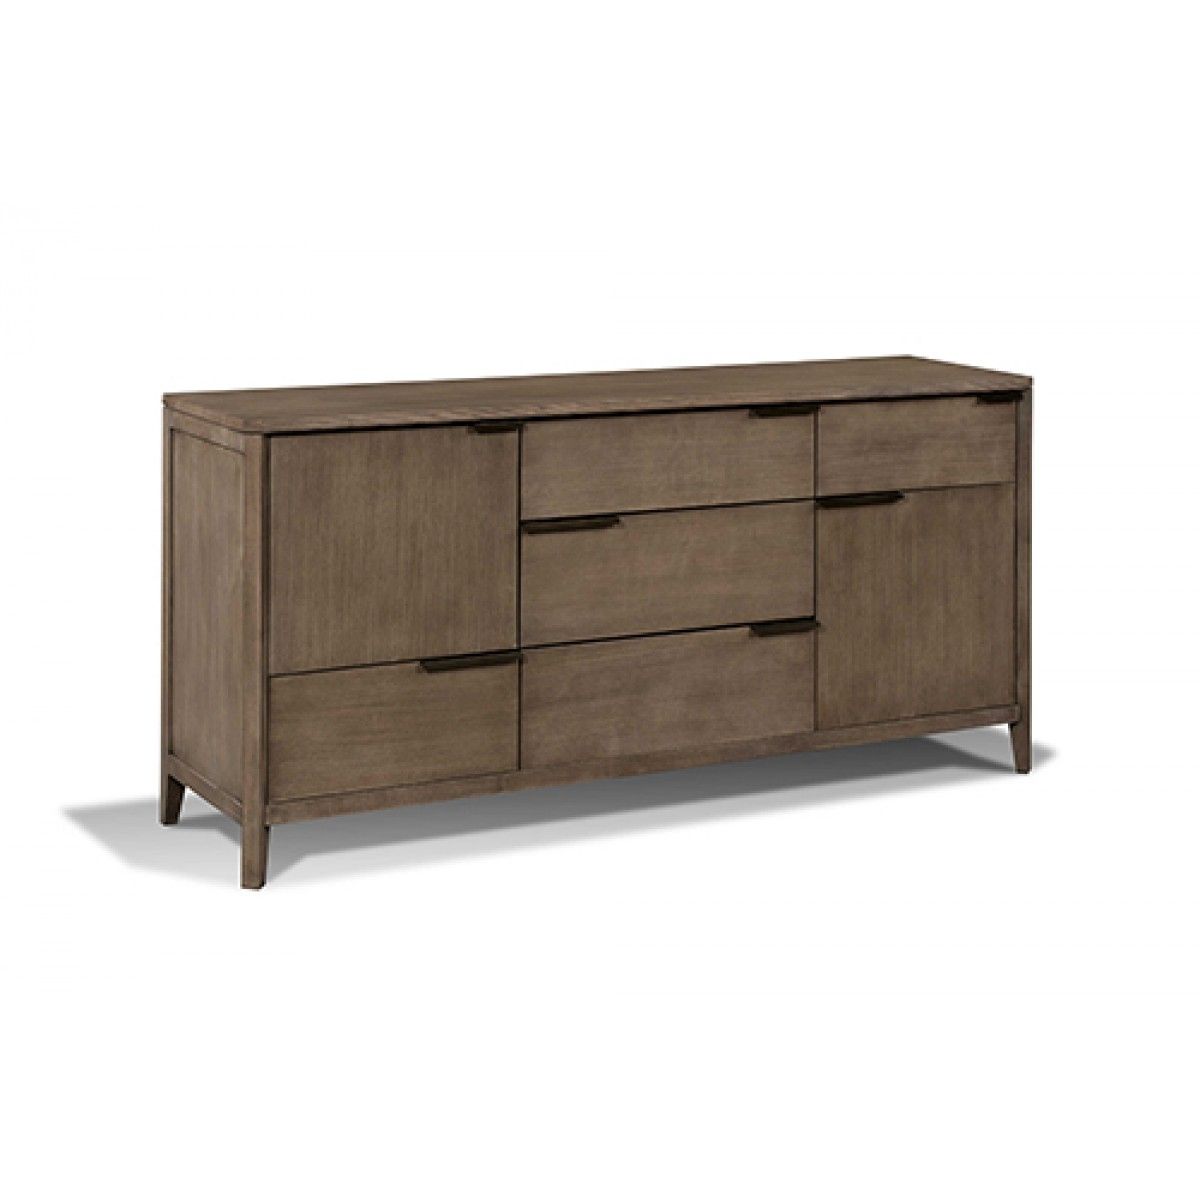 Harden Artistry Candice Buffet Within Current Candice Ii Sideboards (Photo 11 of 20)